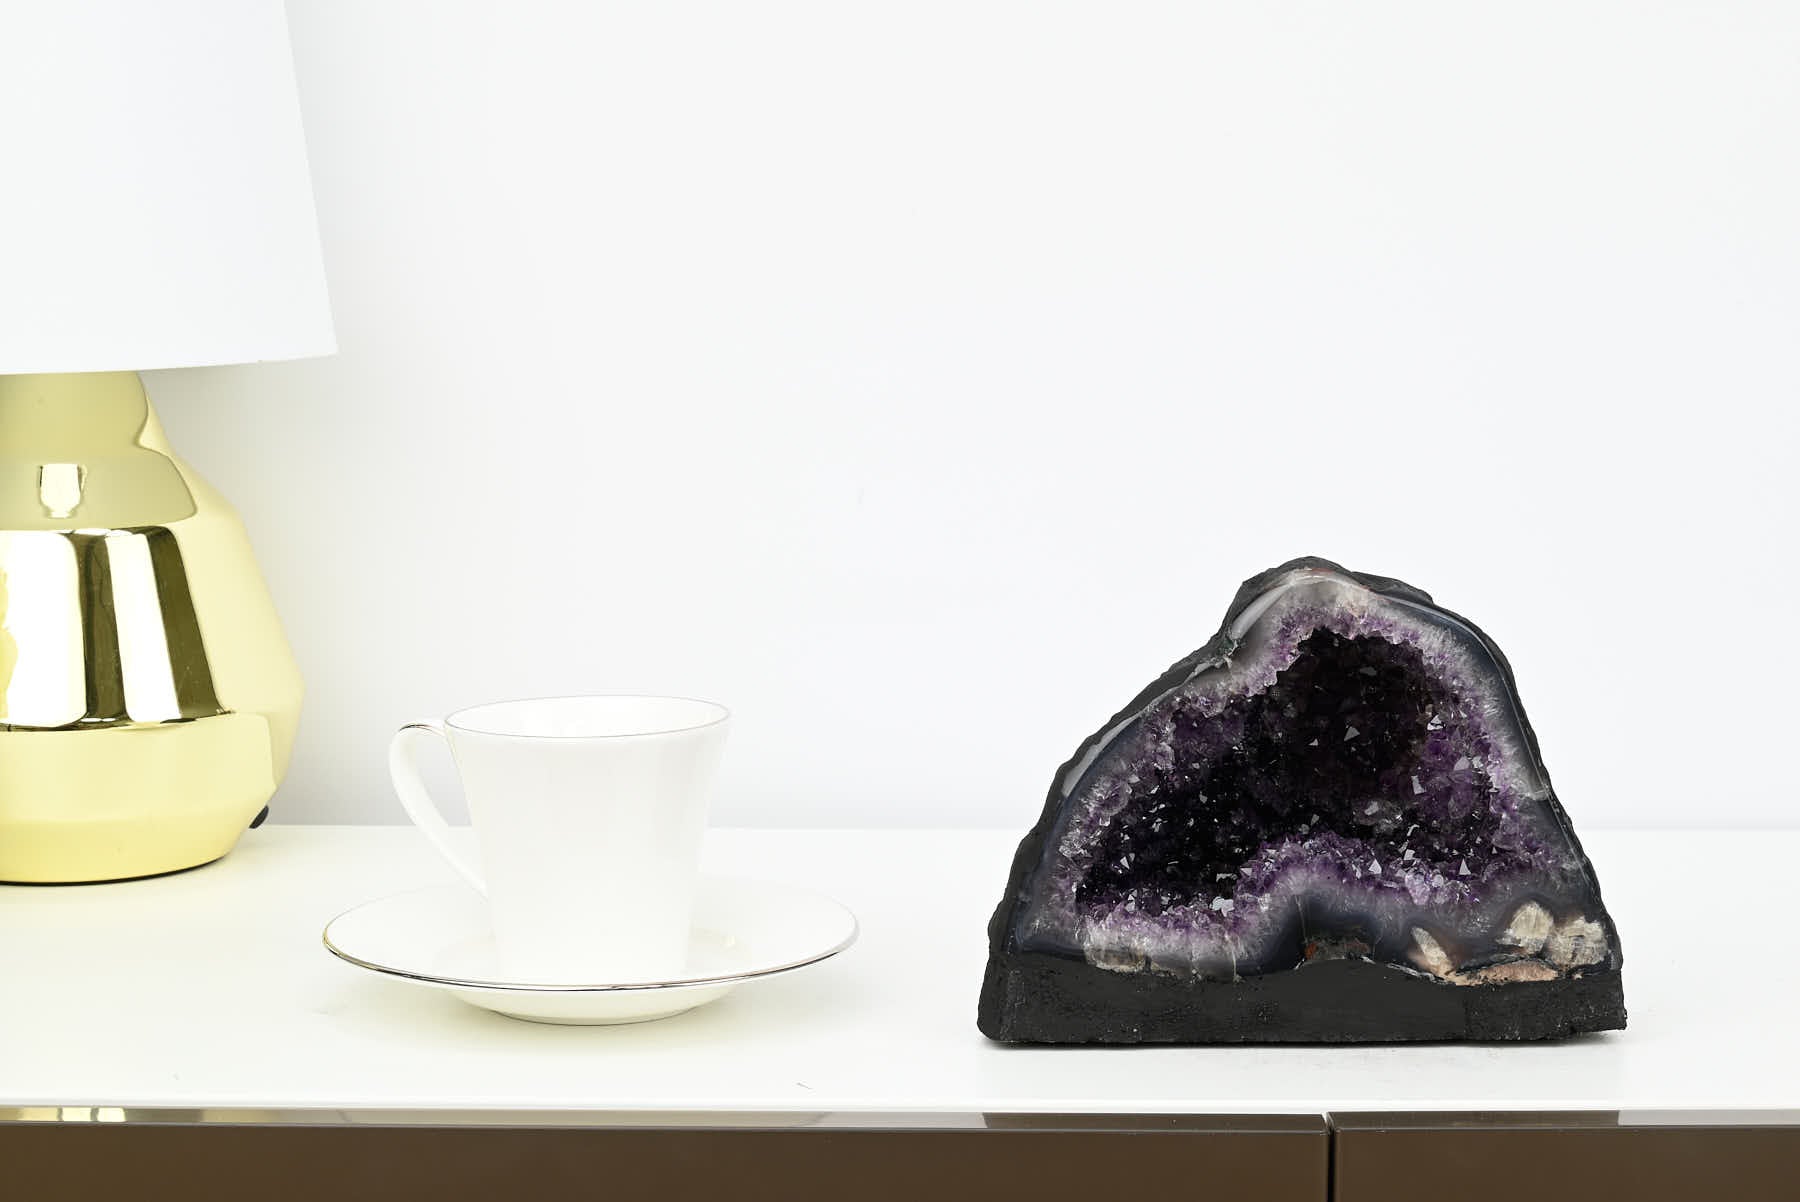 Extra Quality Amethyst Cathedral - 2.66kg, 14cm tall - #CAAMET-10053